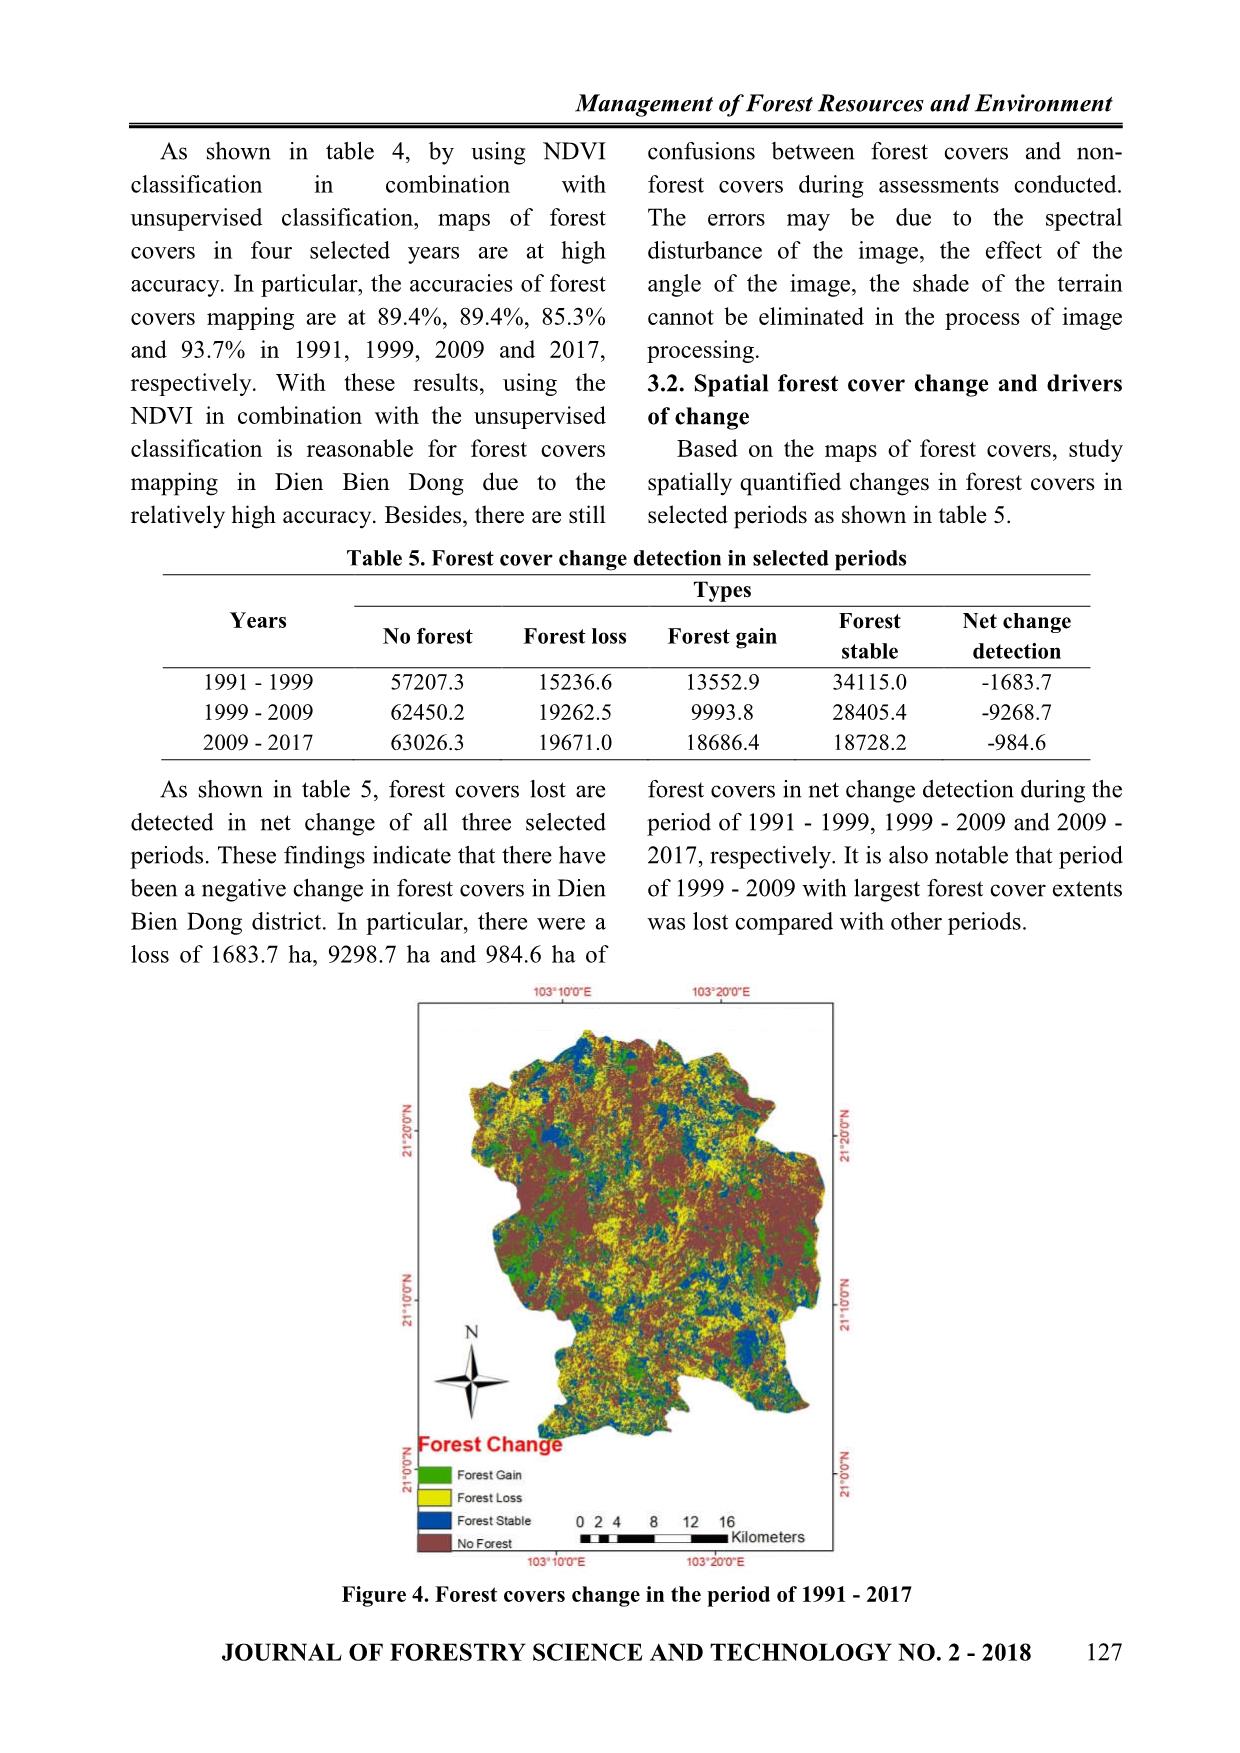 Using multi-temporal remote sensing data to quantify forest cover change in Dien Bien Dong district, Dien Bien province during 1991-2017 trang 6